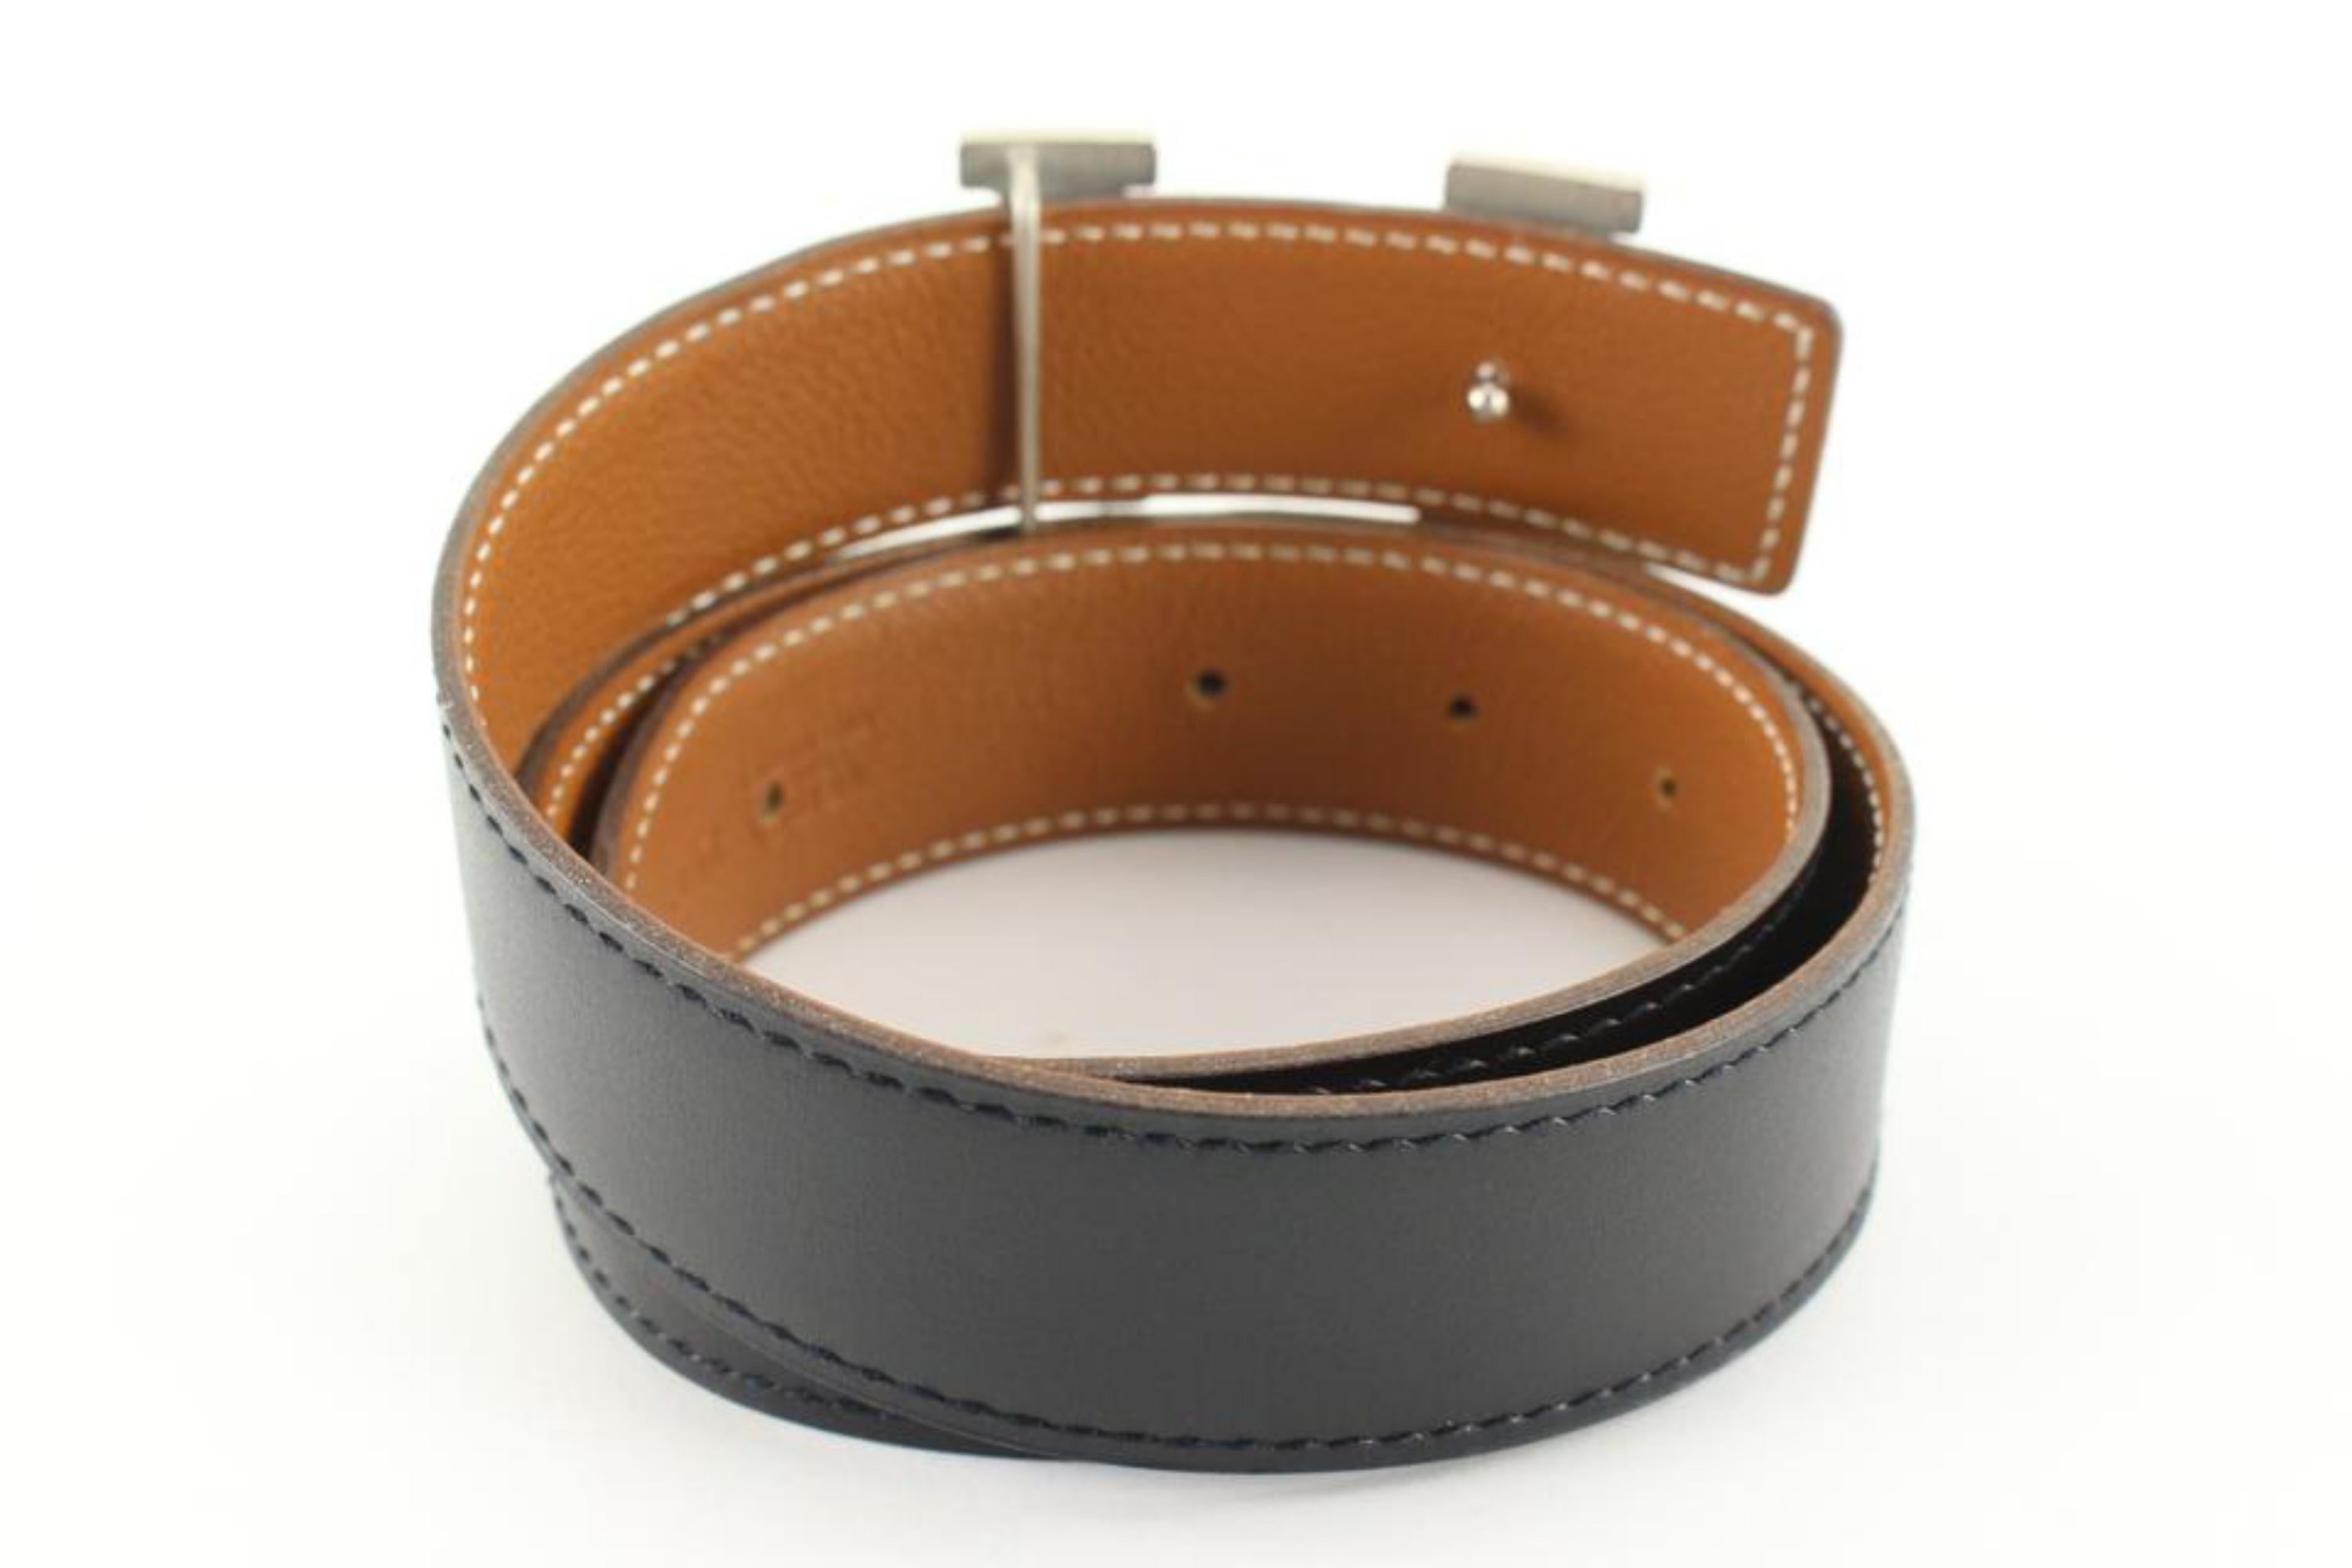 Hermès 32mm Martelee Reversible H Logo Belt Hammered Buckle 85h629s In Good Condition For Sale In Dix hills, NY